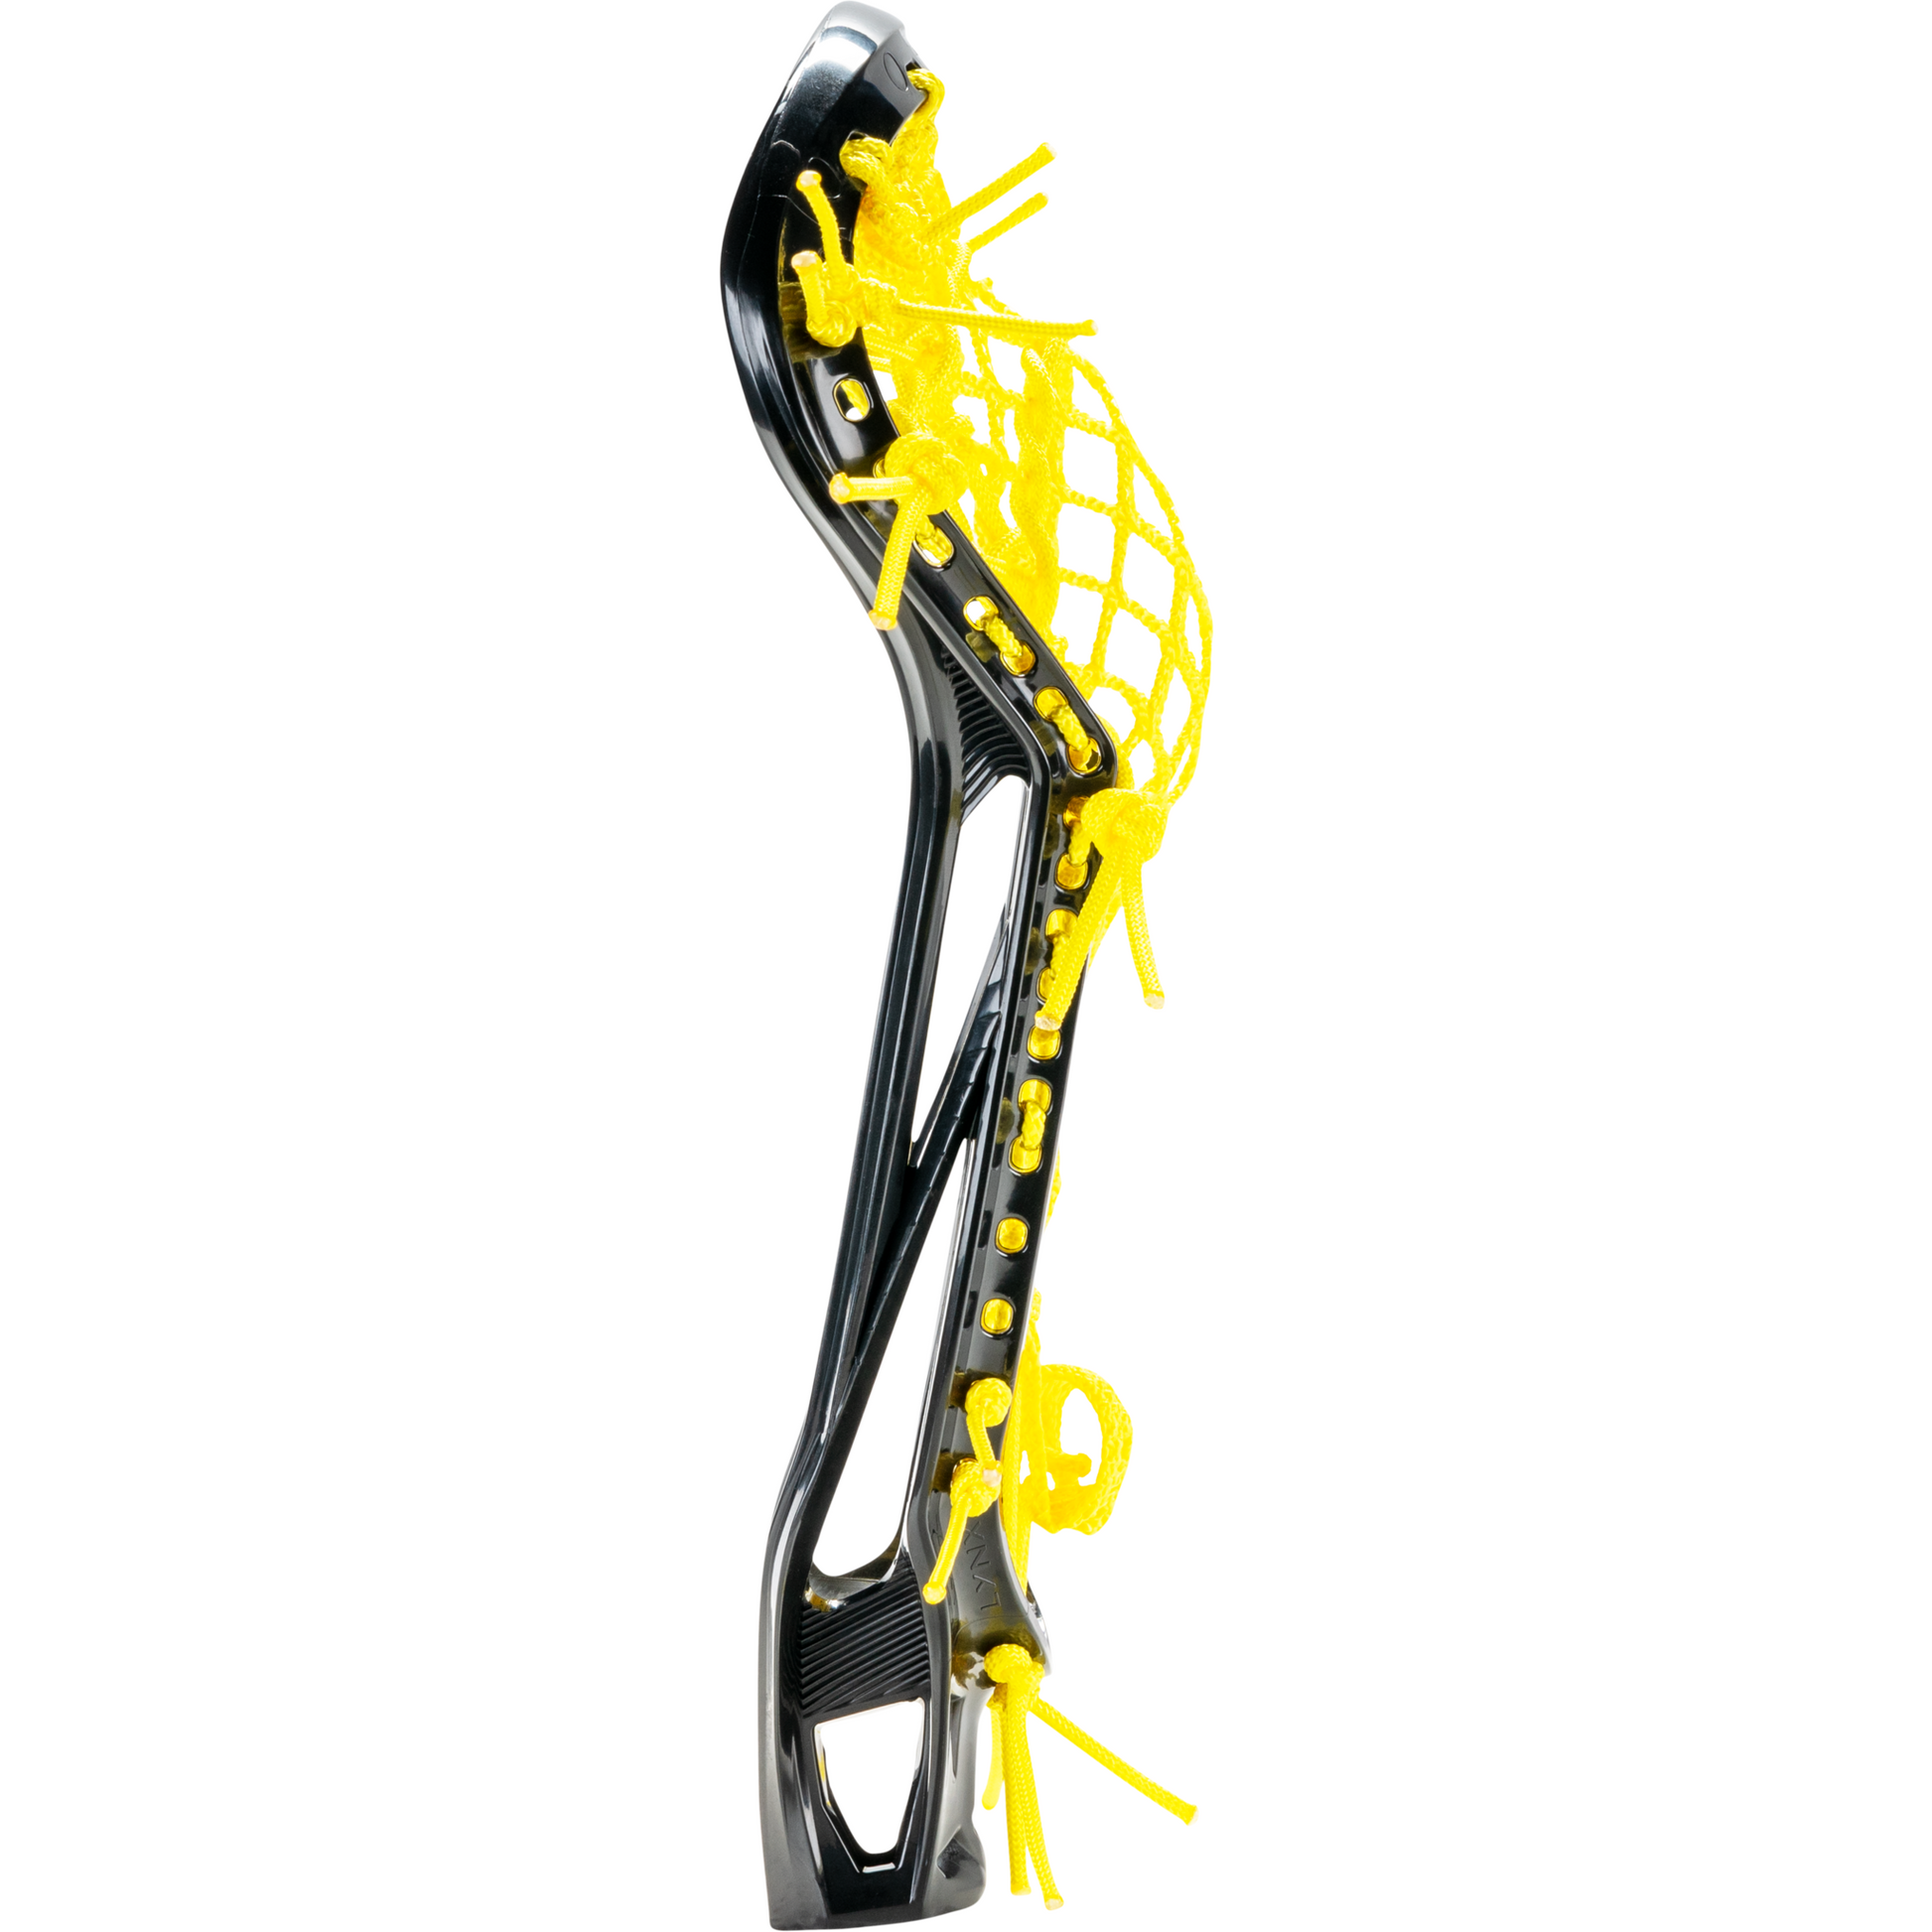 LYNX Ignition Runner Strung Women's Lacrosse Head, black head with yellow pocket